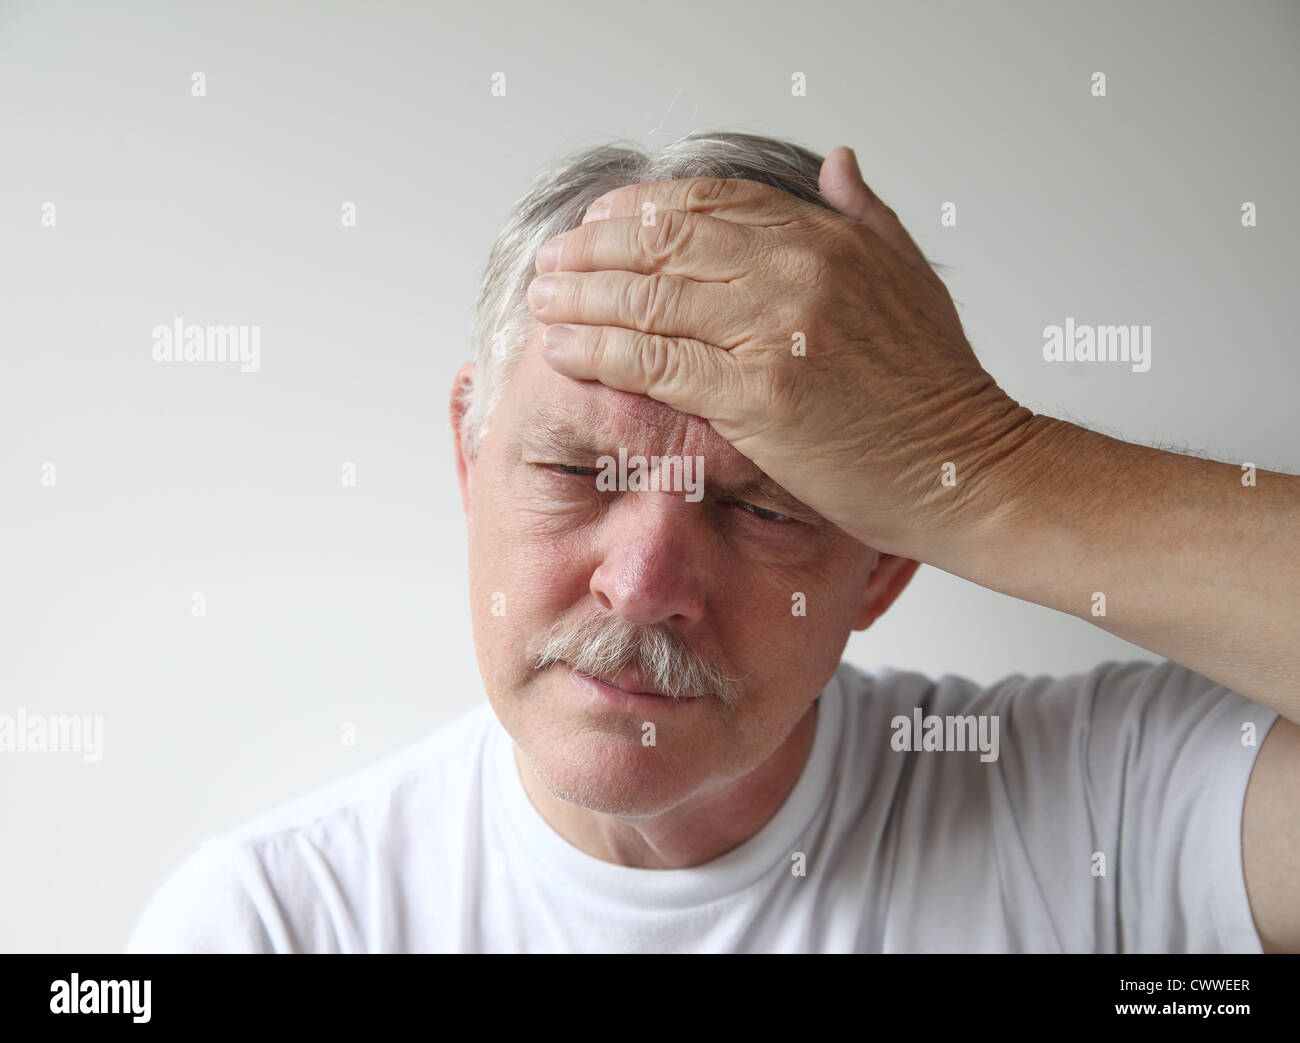 a man puts his hand to his forehead in pain Stock Photo